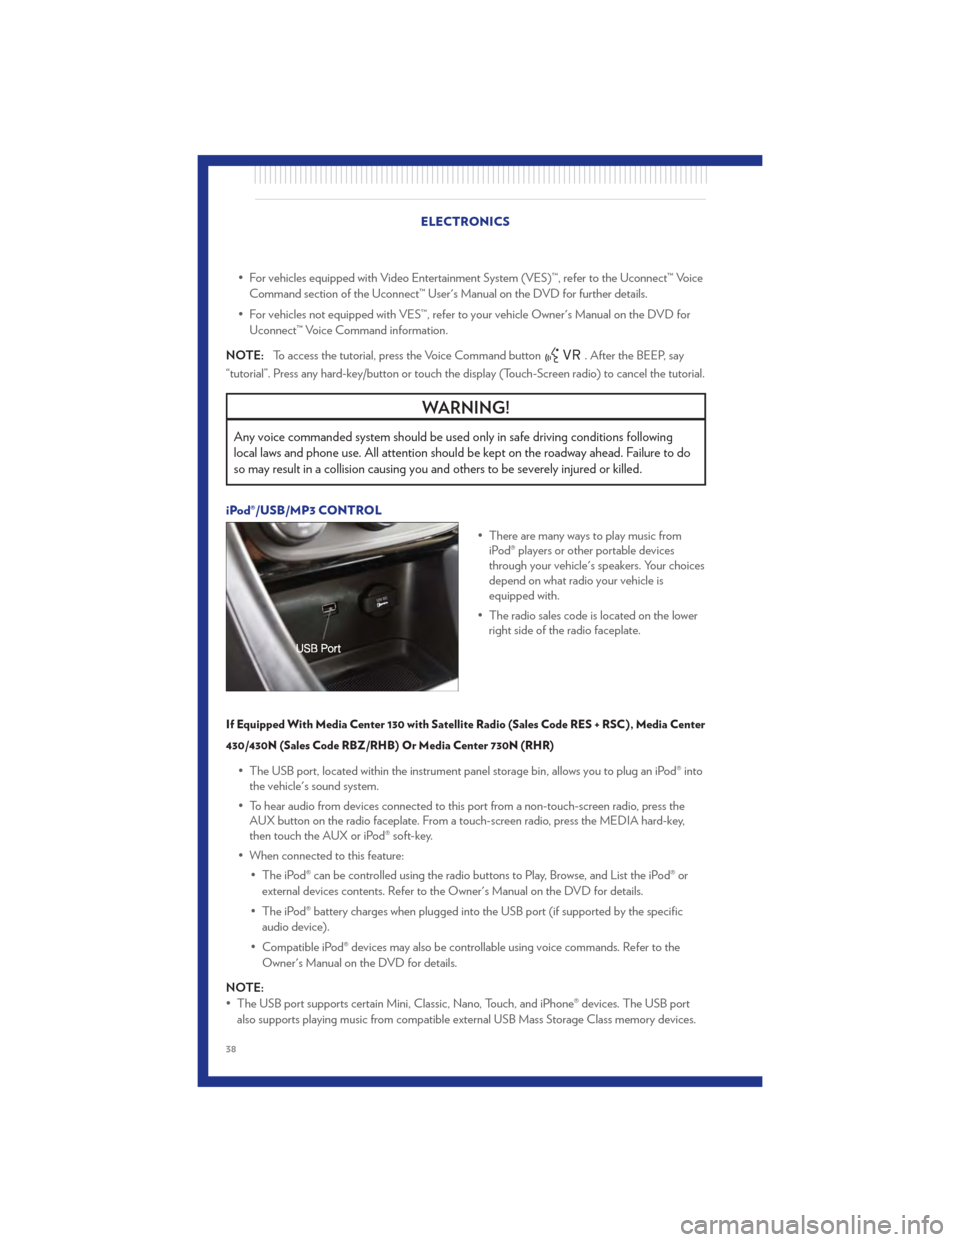 CHRYSLER 200 CONVERTIBLE 2011 1.G User Guide • For vehicles equipped with Video Entertainment System (VES)™, refer to the Uconnect™ VoiceCommand section of the Uconnect™ Users Manual on the DVD for further details.
• For vehicles not 